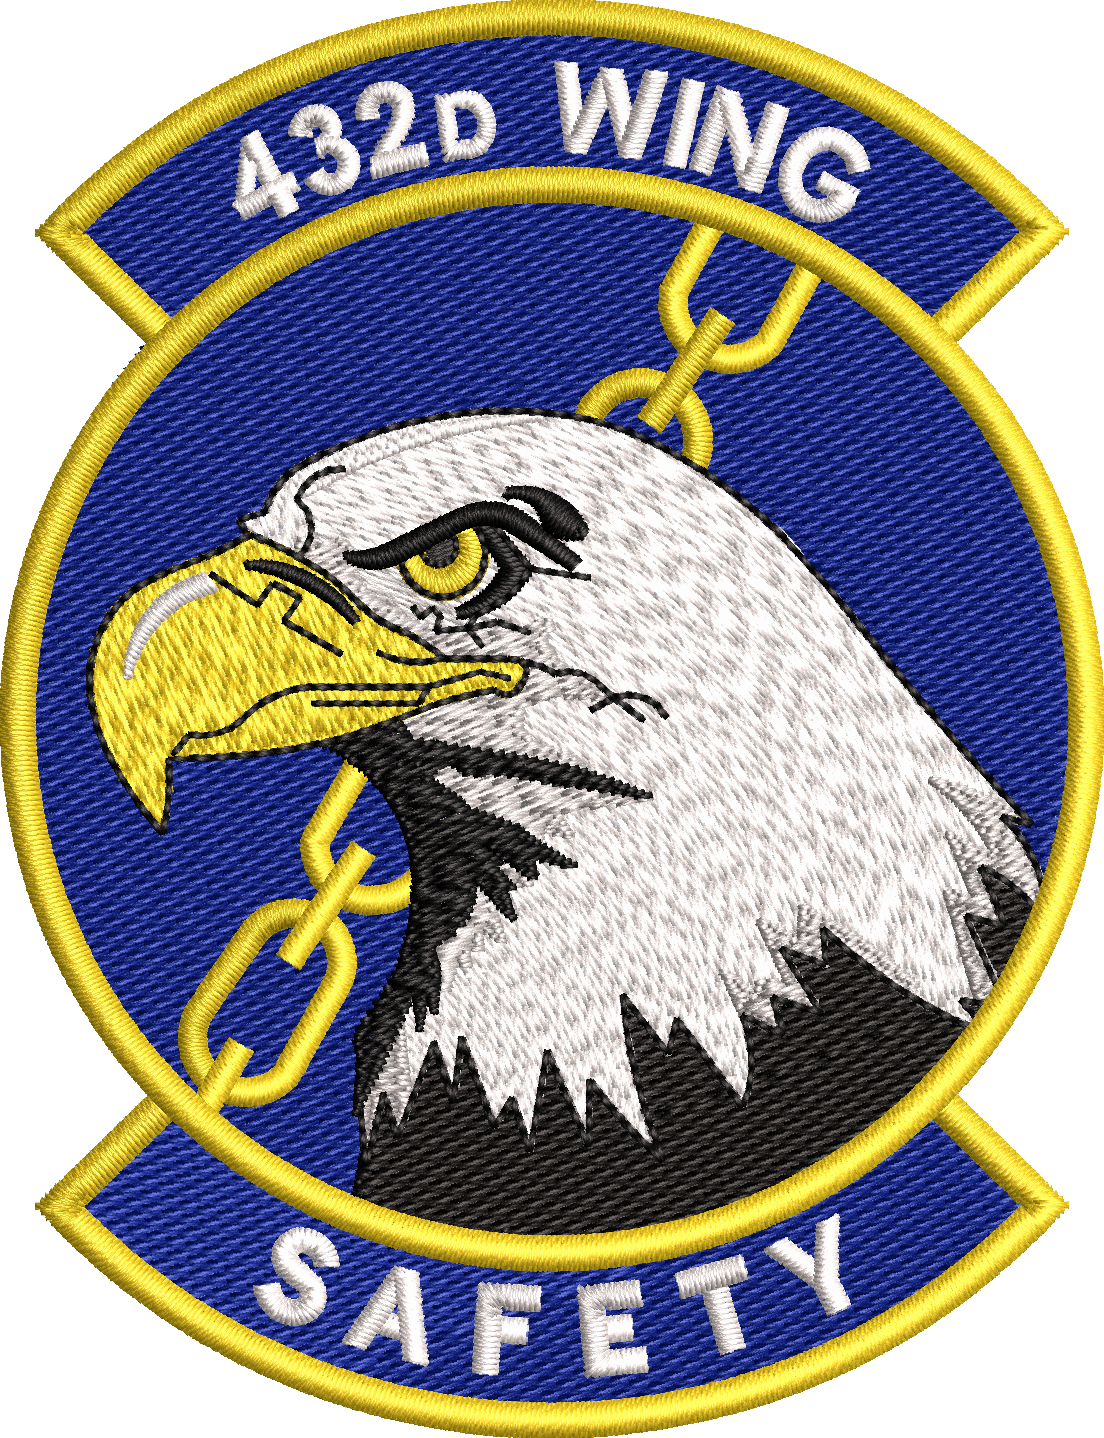 432d Wing Safety